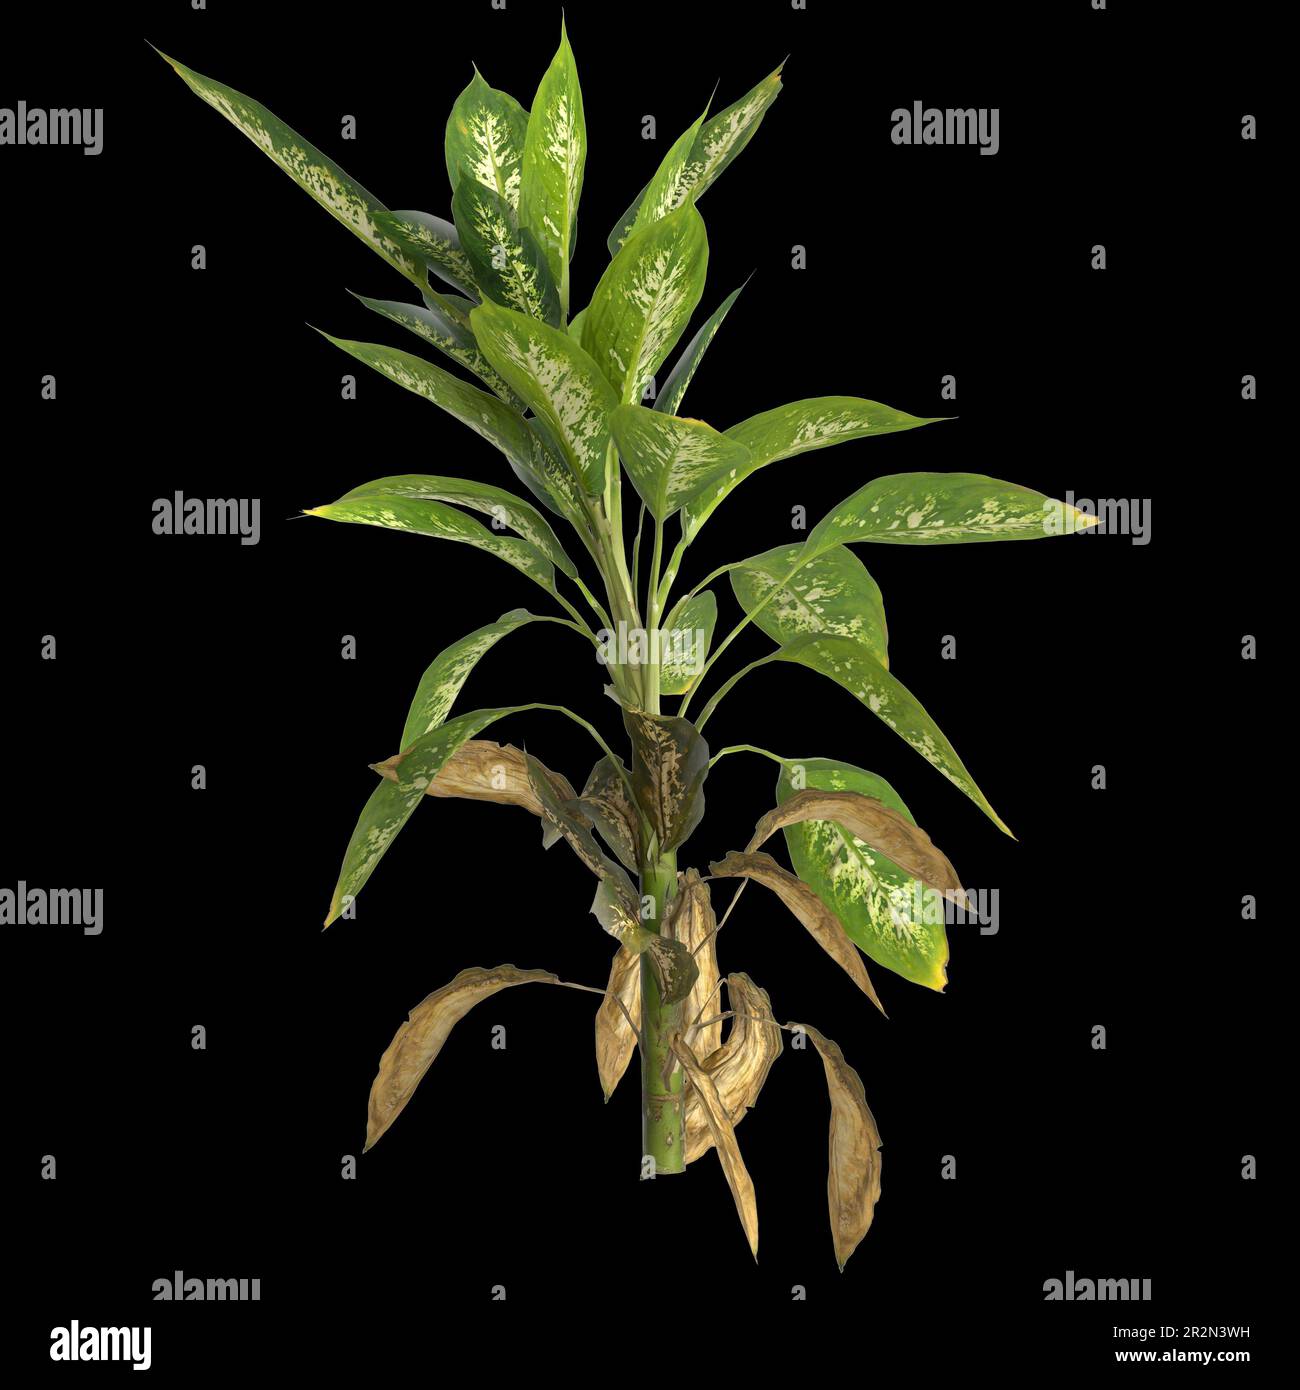 3d illustration of dieffenbachia maculata plant isolated on black background Stock Photo